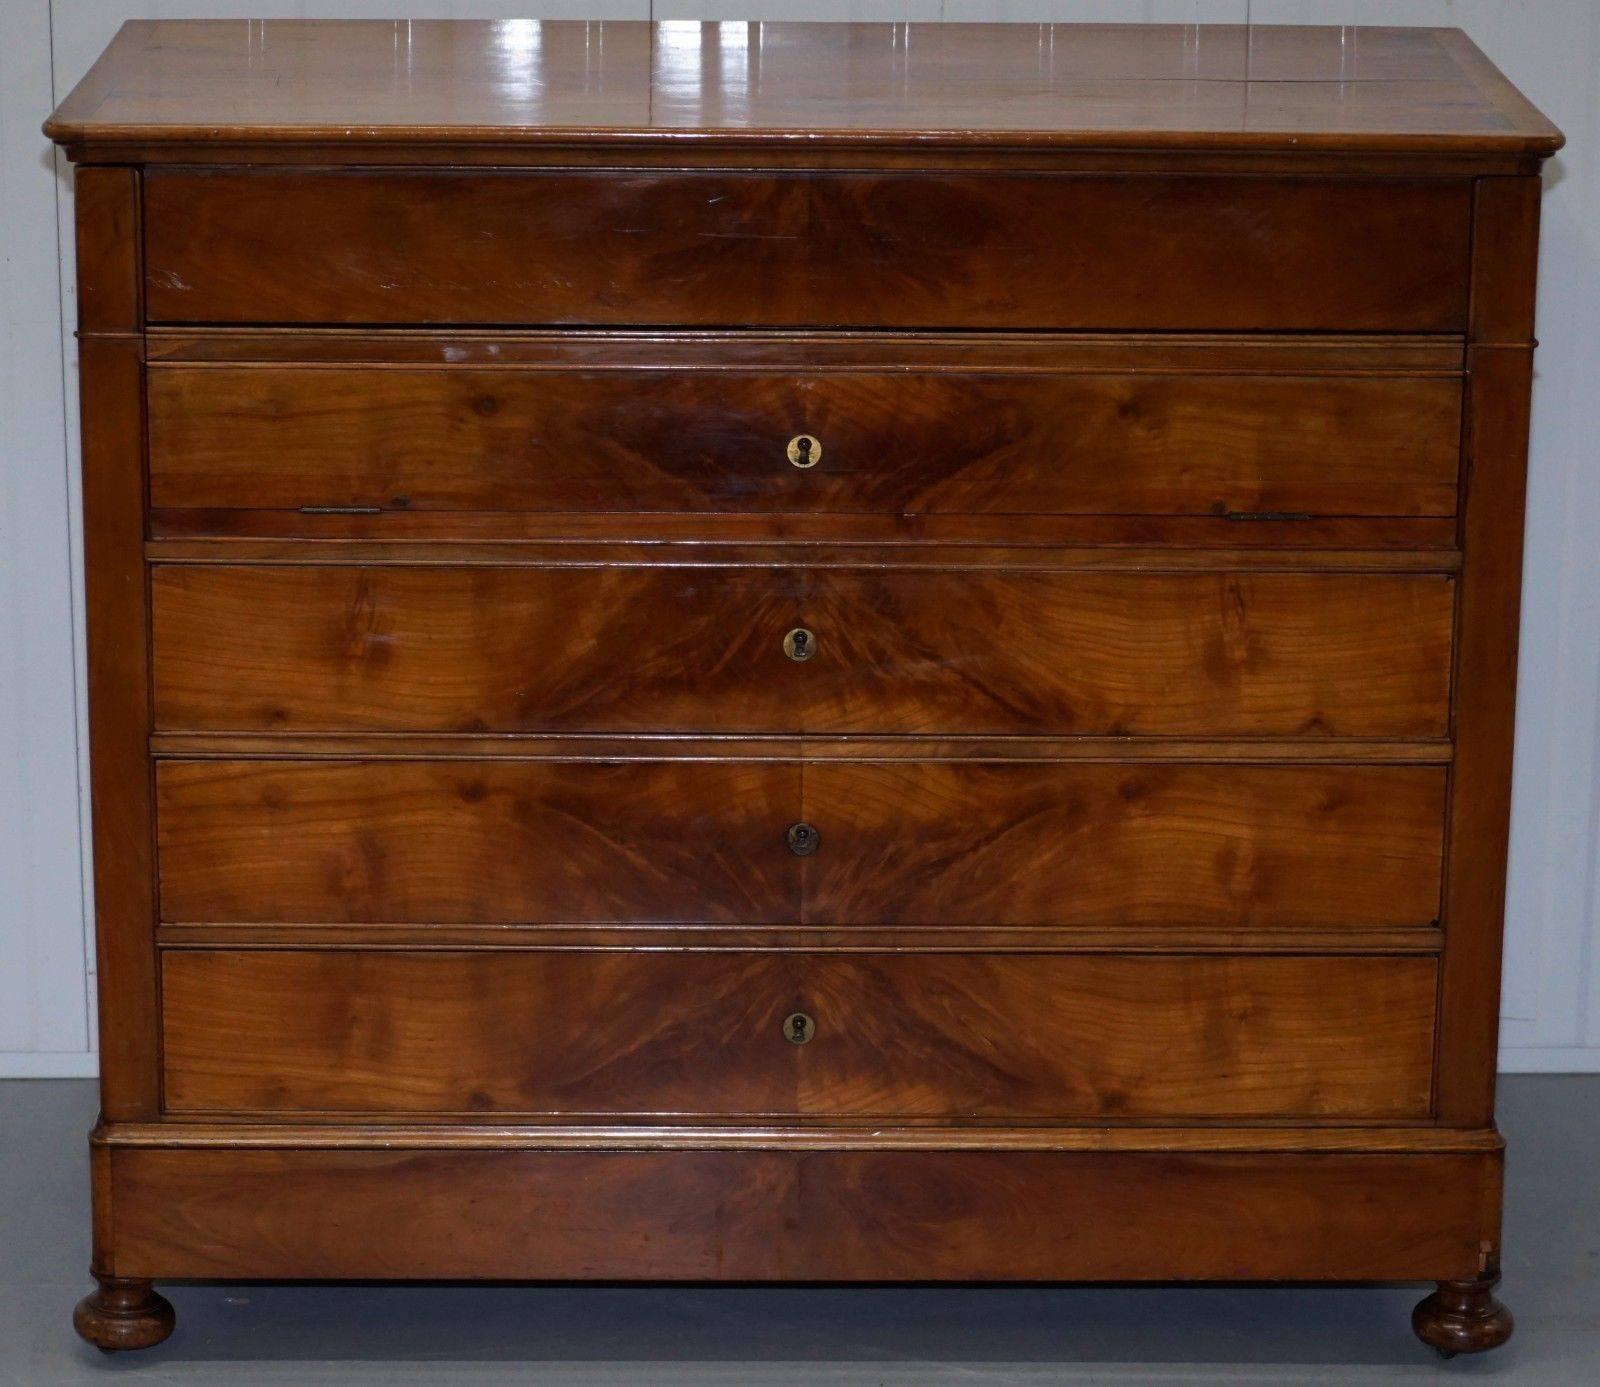 We are delighted to offer for sale his very rare solid cheerywood Biedermeier German 1840 commode / chest of drawers sold at Sotheby’s in Amsterdam on the 1st November 2006, they were the property of Alsatian Castle

I’m sure with a bit of